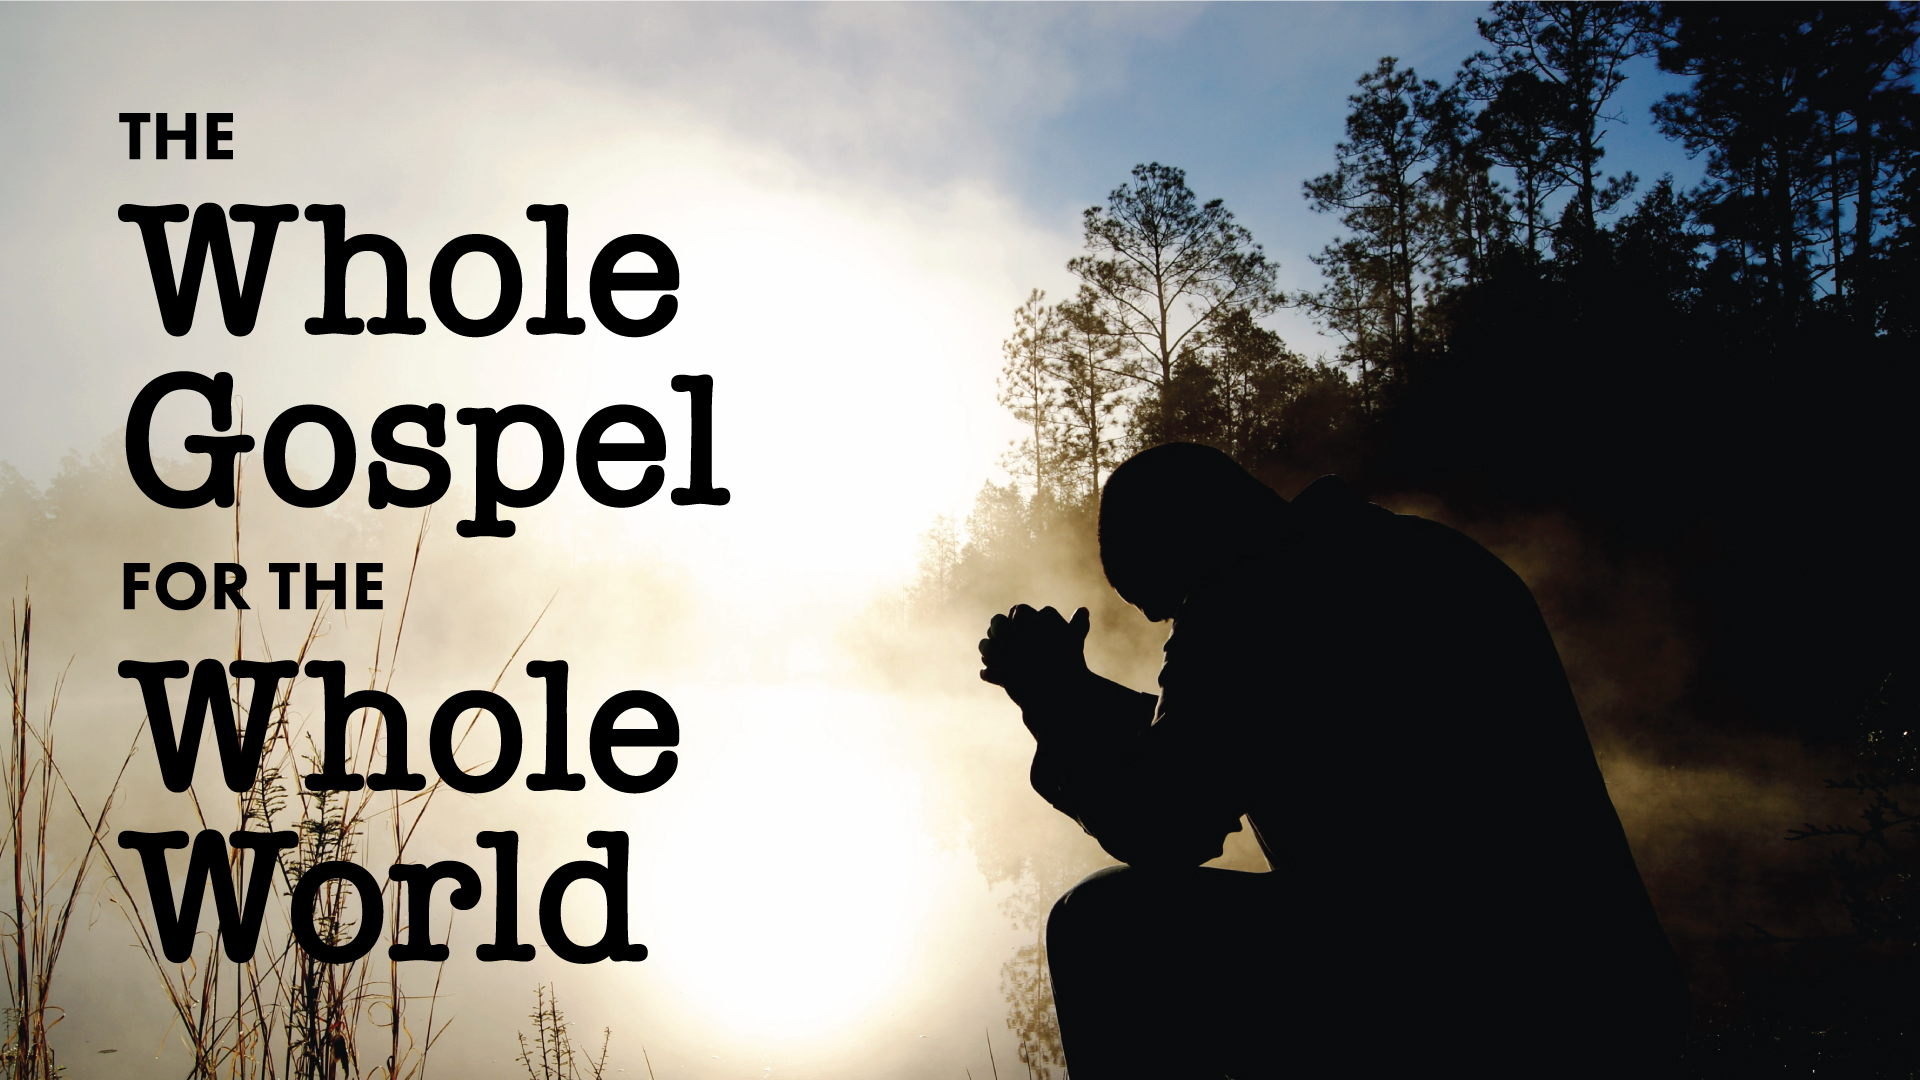 The Whole Gospel for the Whole World